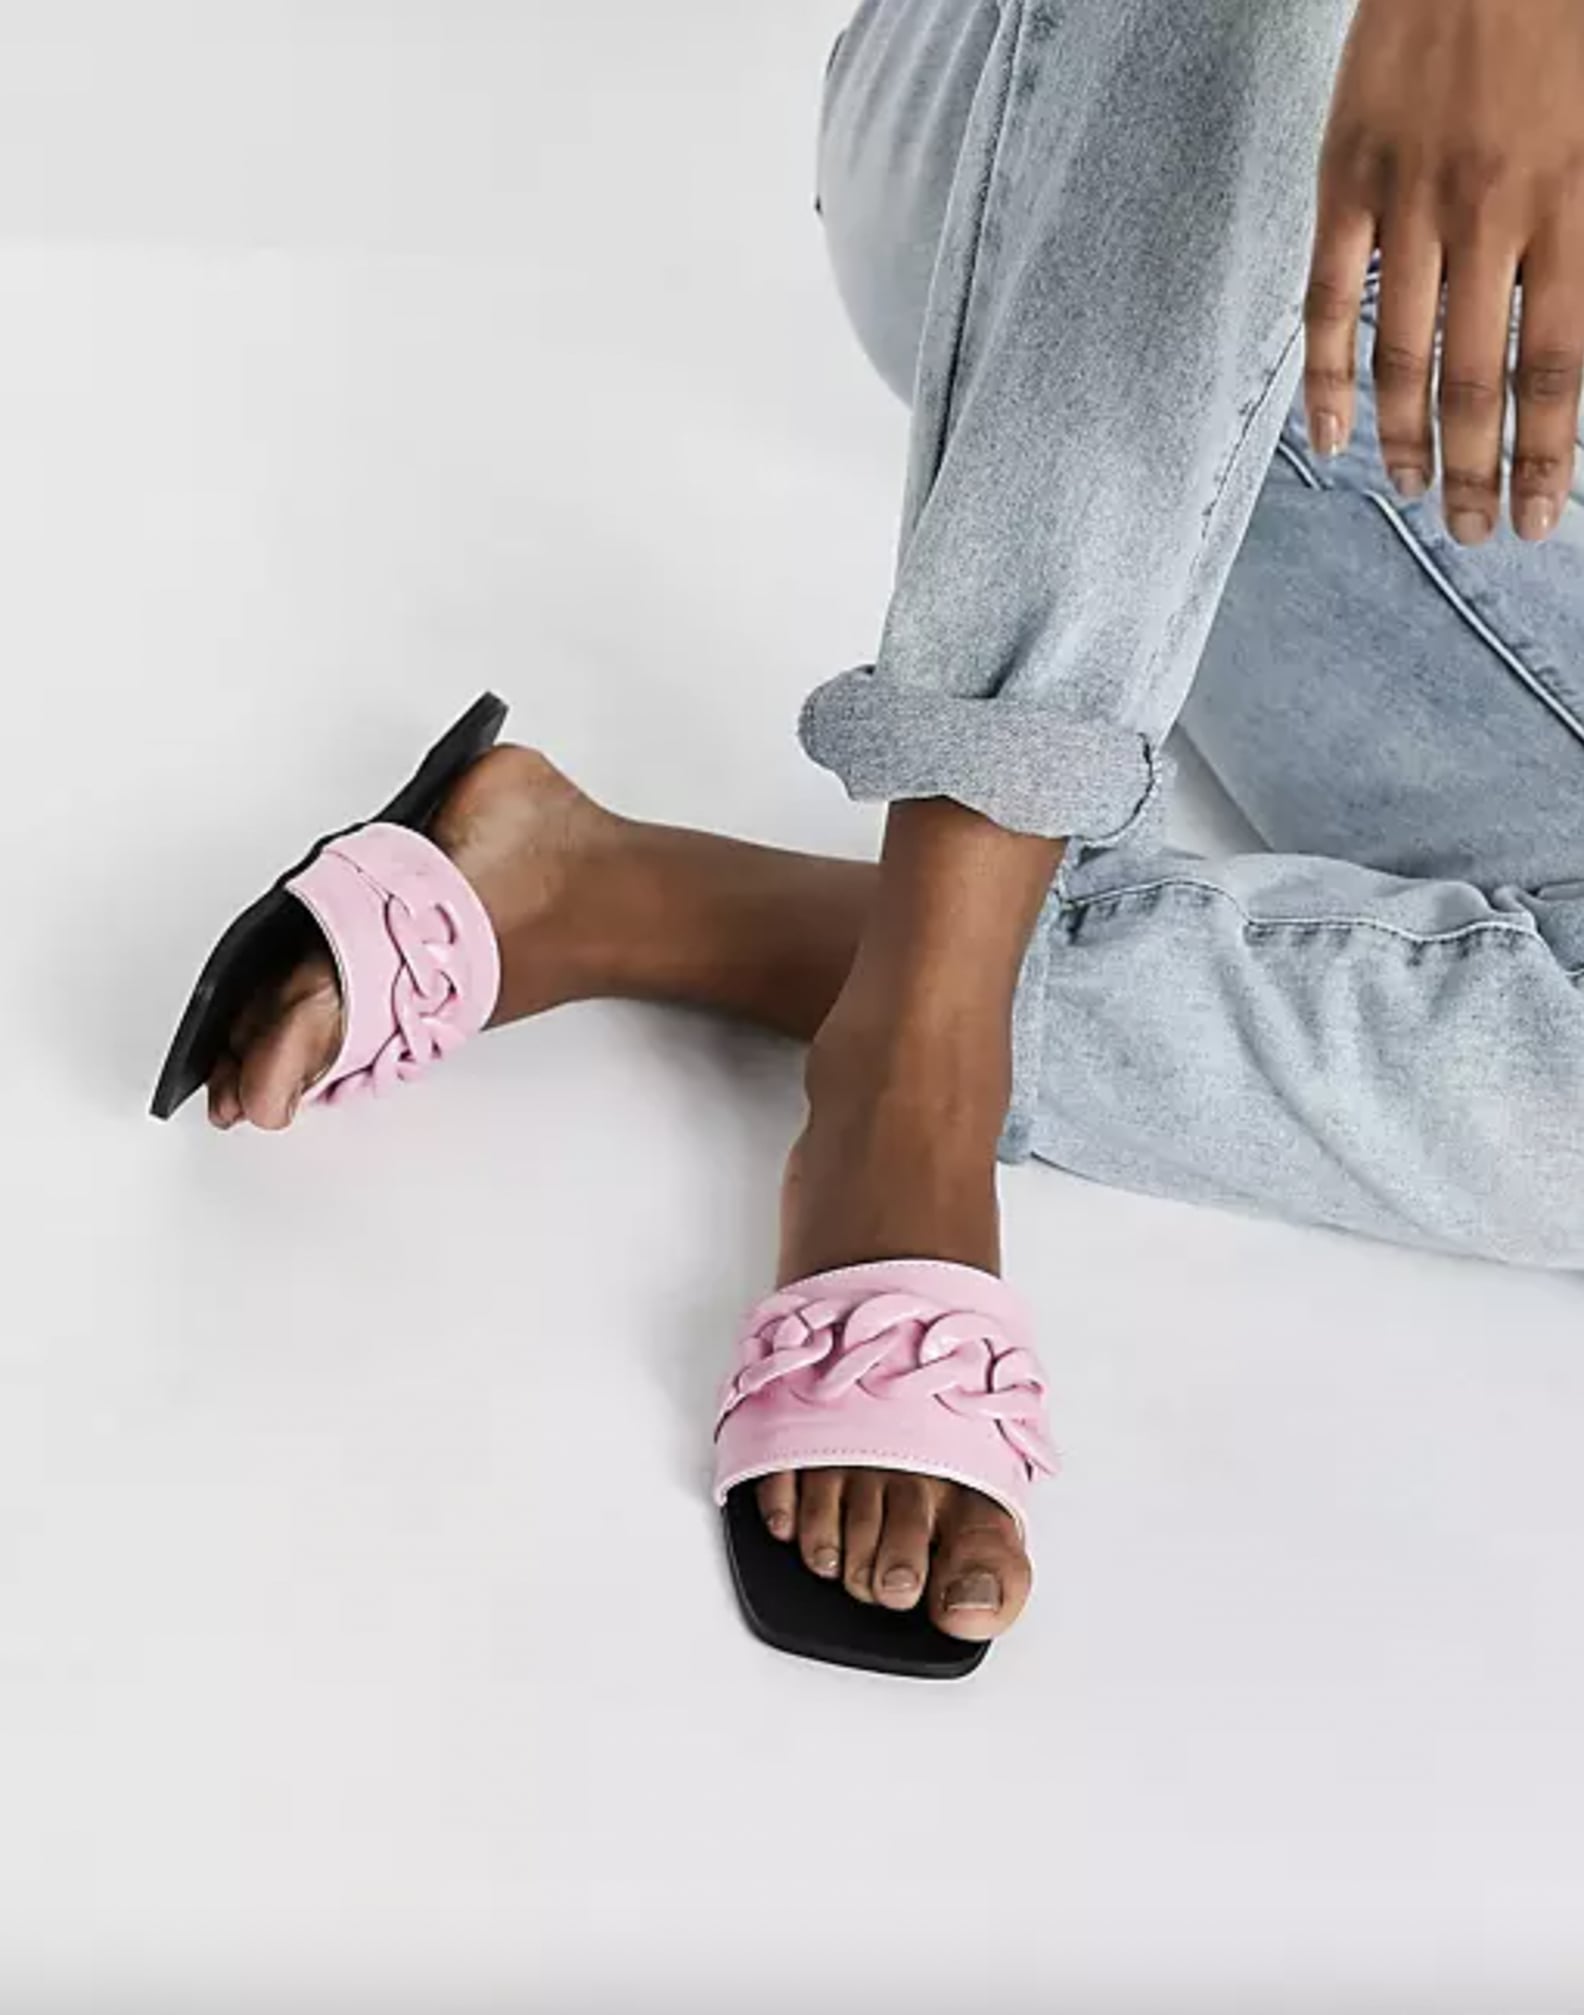 8 Cute Sandal Trends to Shop For Spring and Summer 2021 | POPSUGAR Fashion